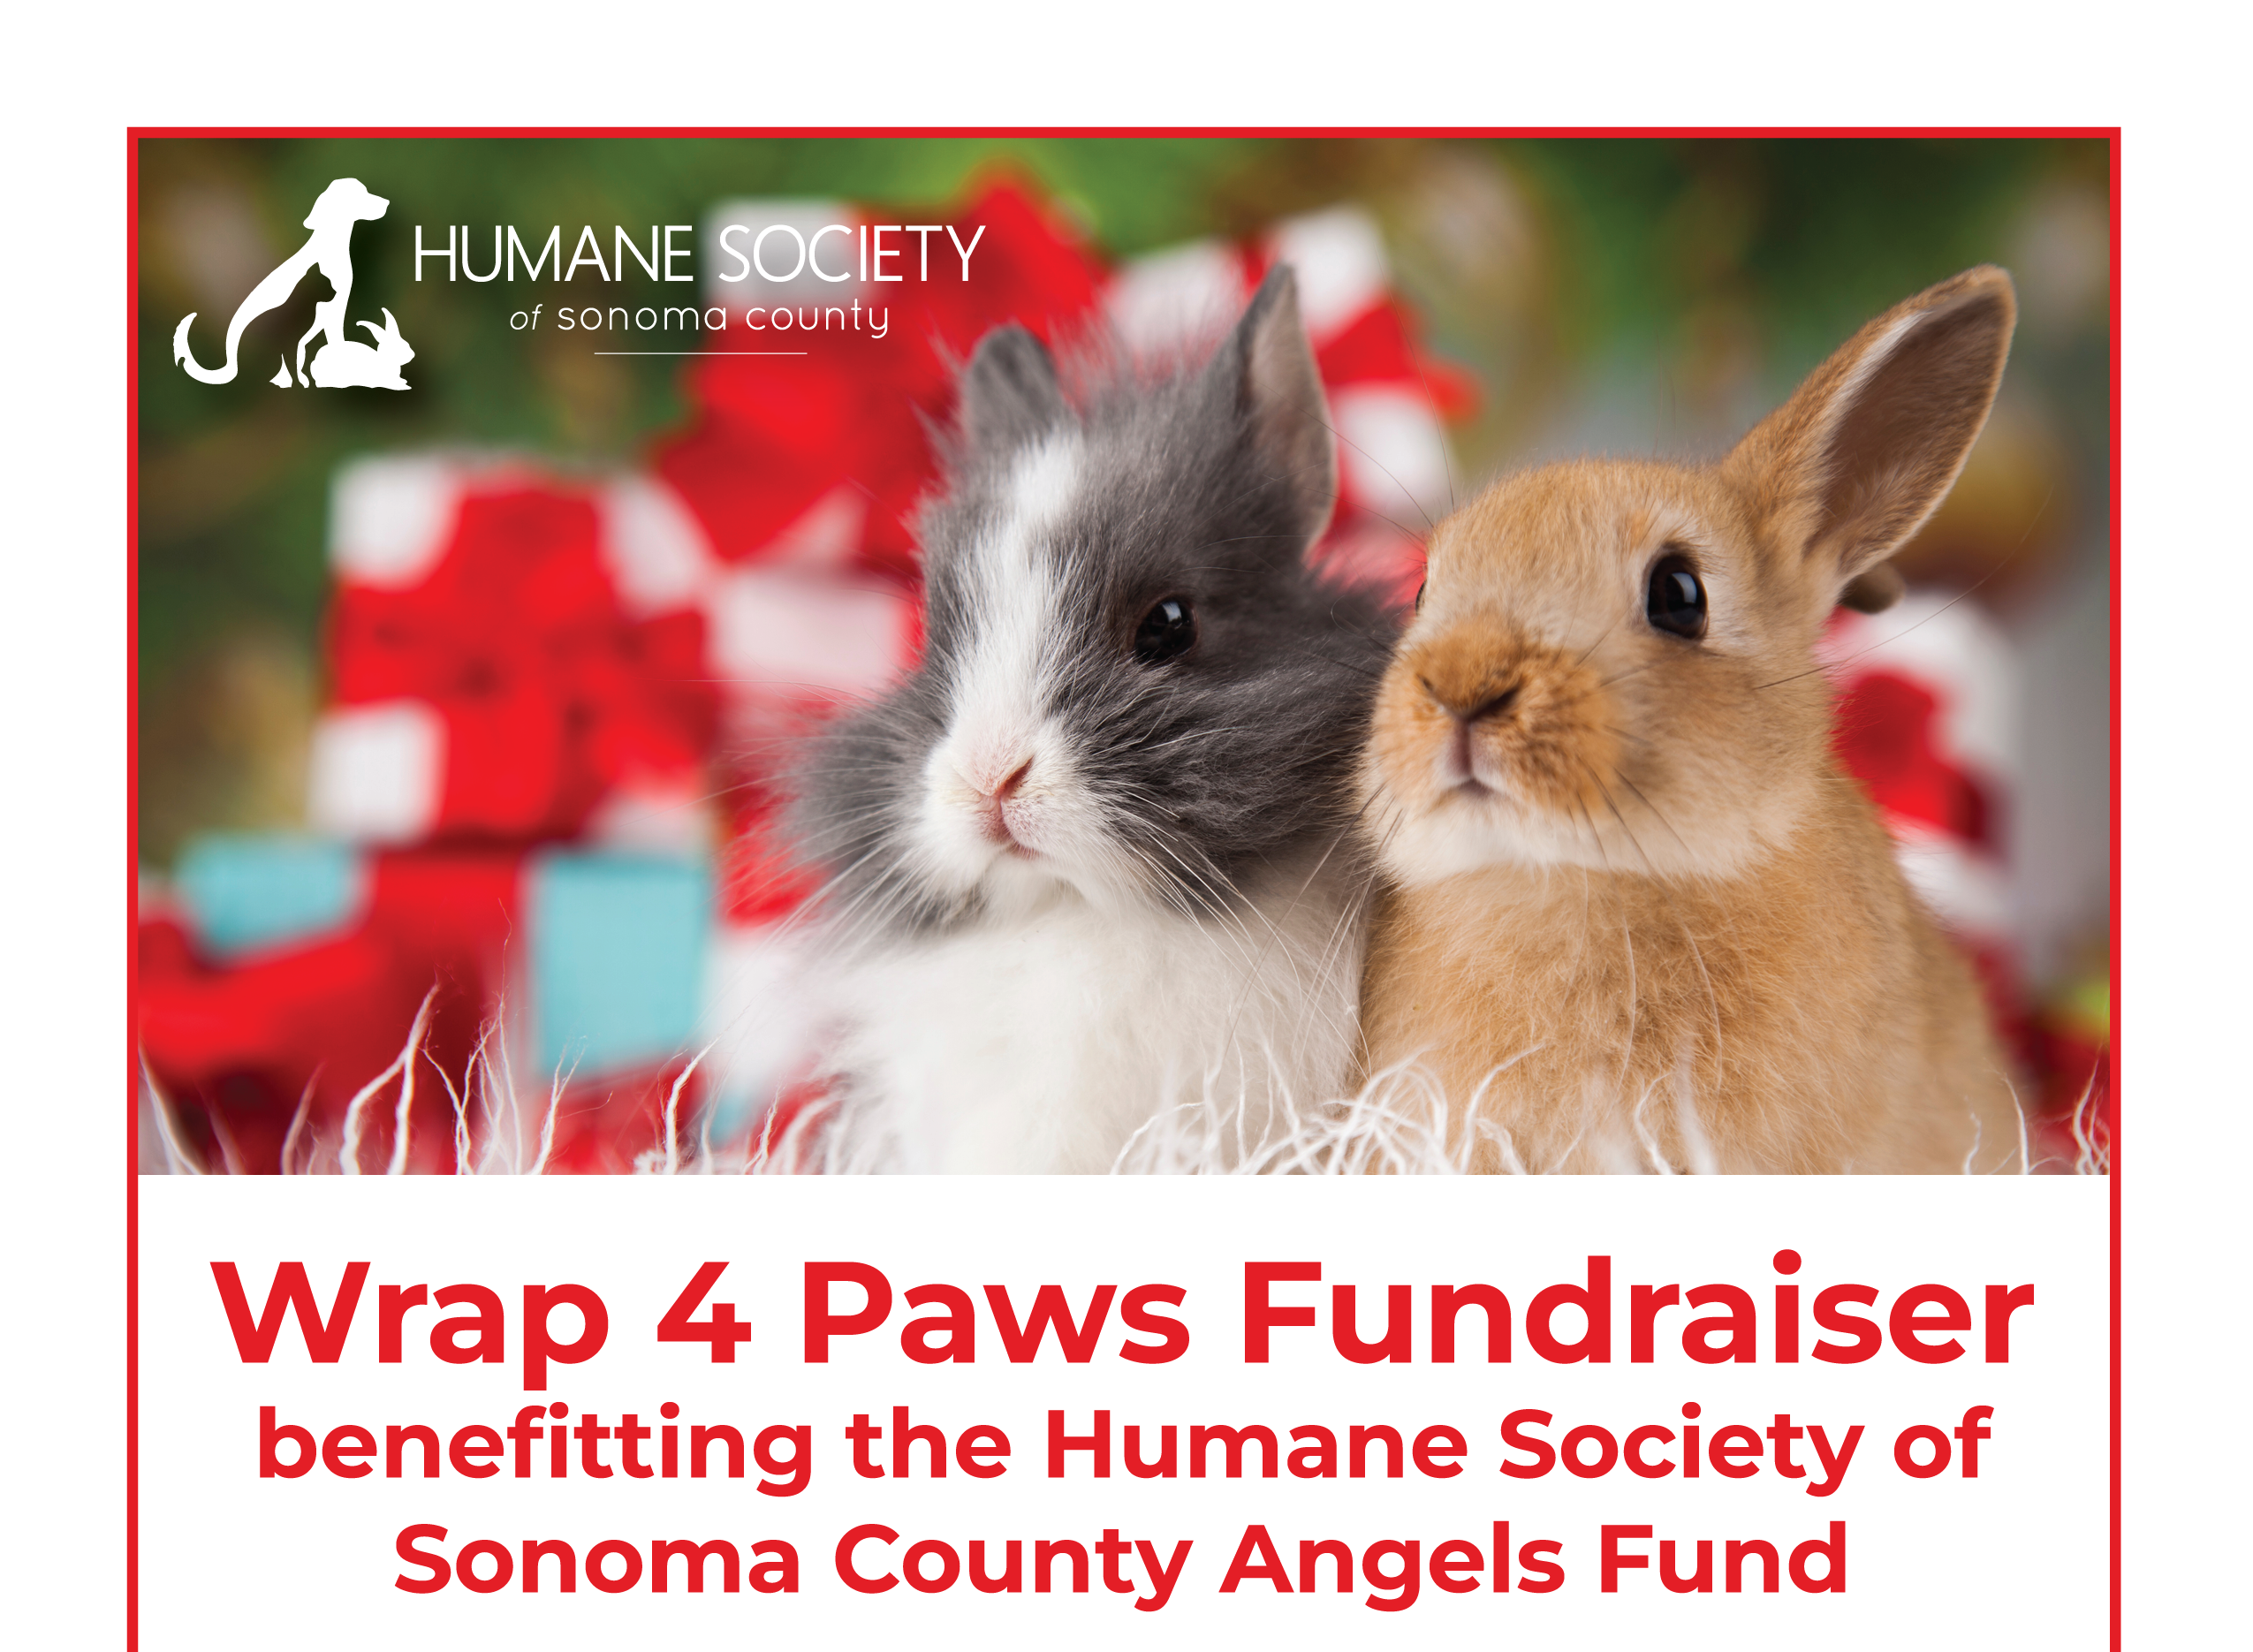 Wrap 4 Paws Fundraiser benefiting the Humane Society of Sonoma County Angels Fund.